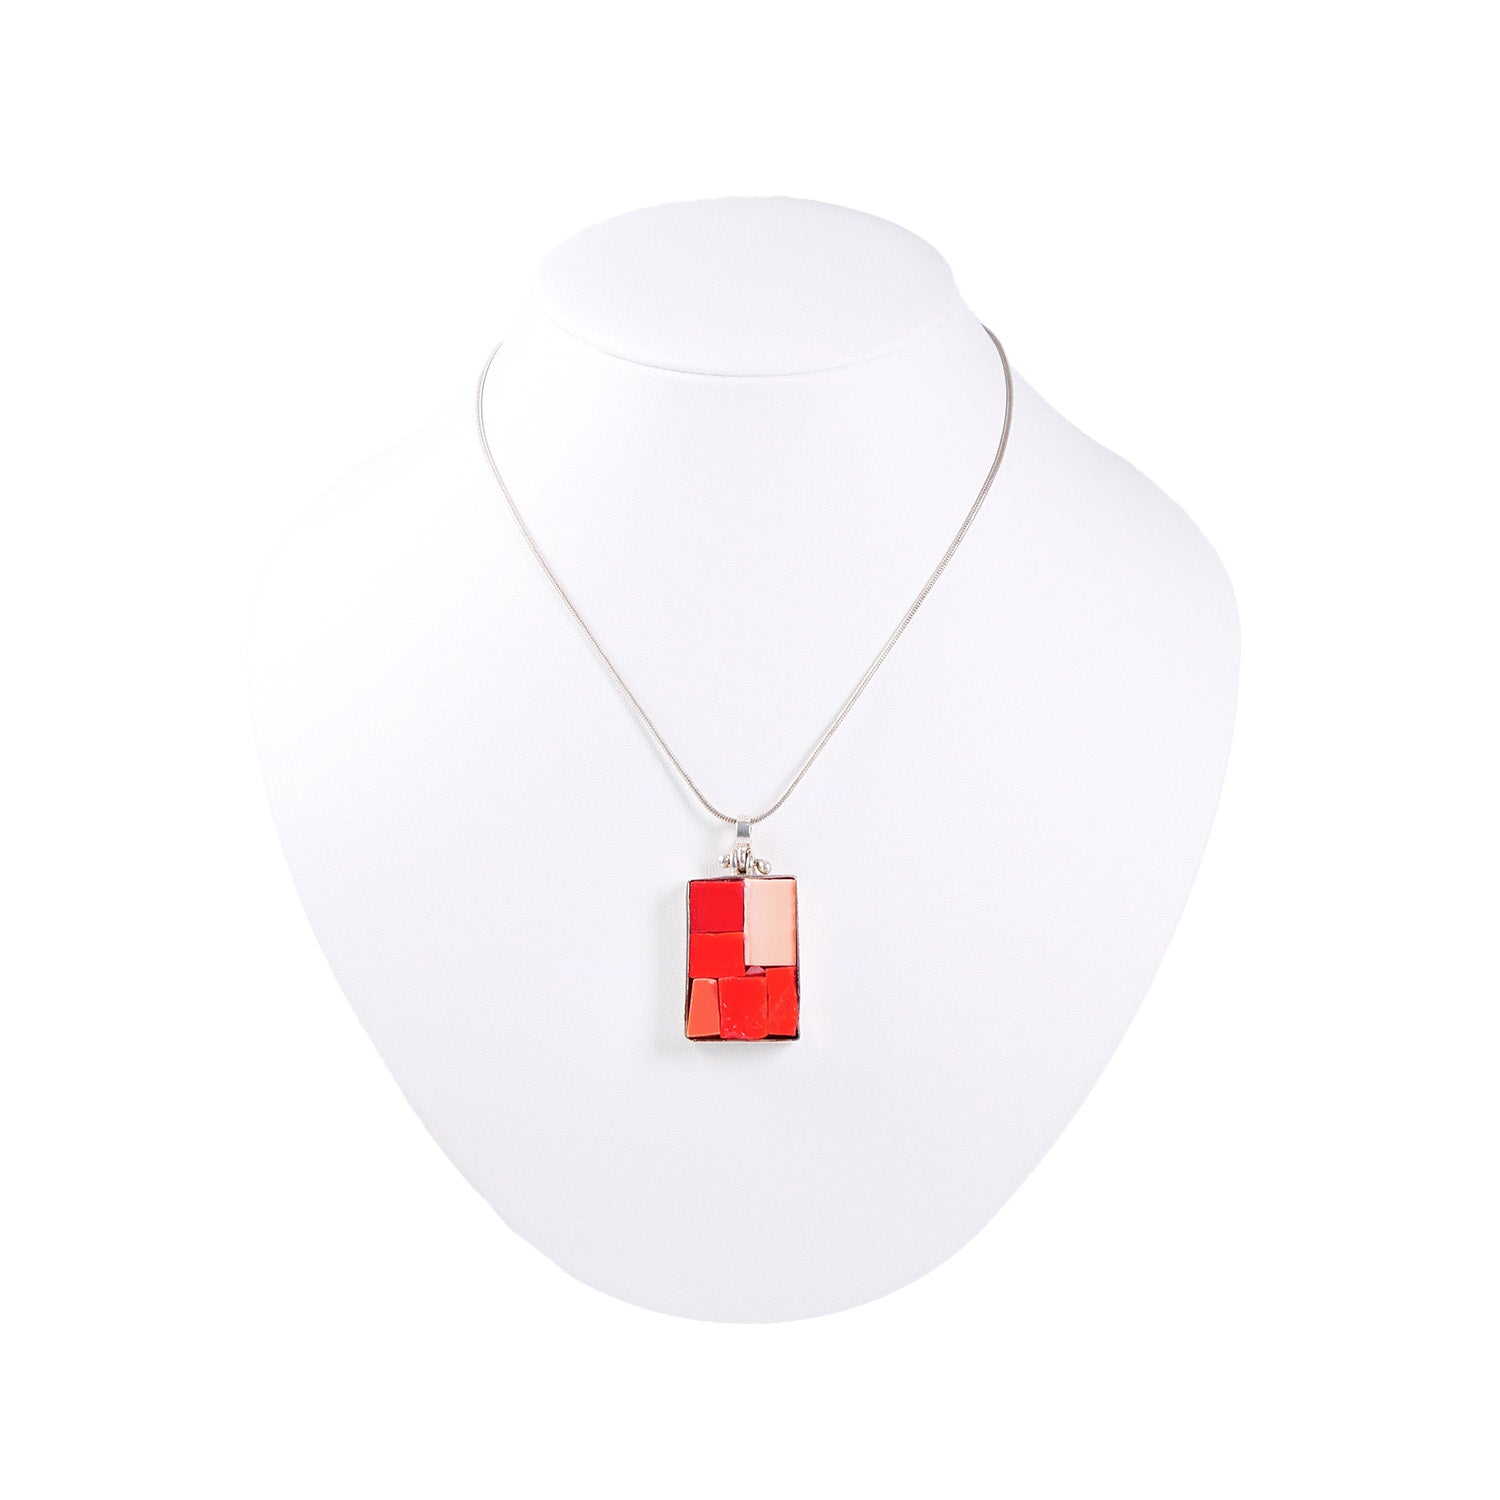 NILAJA [ニラジャ] / rectangle glass necklace [レクタングルグラスネックレス] (red)